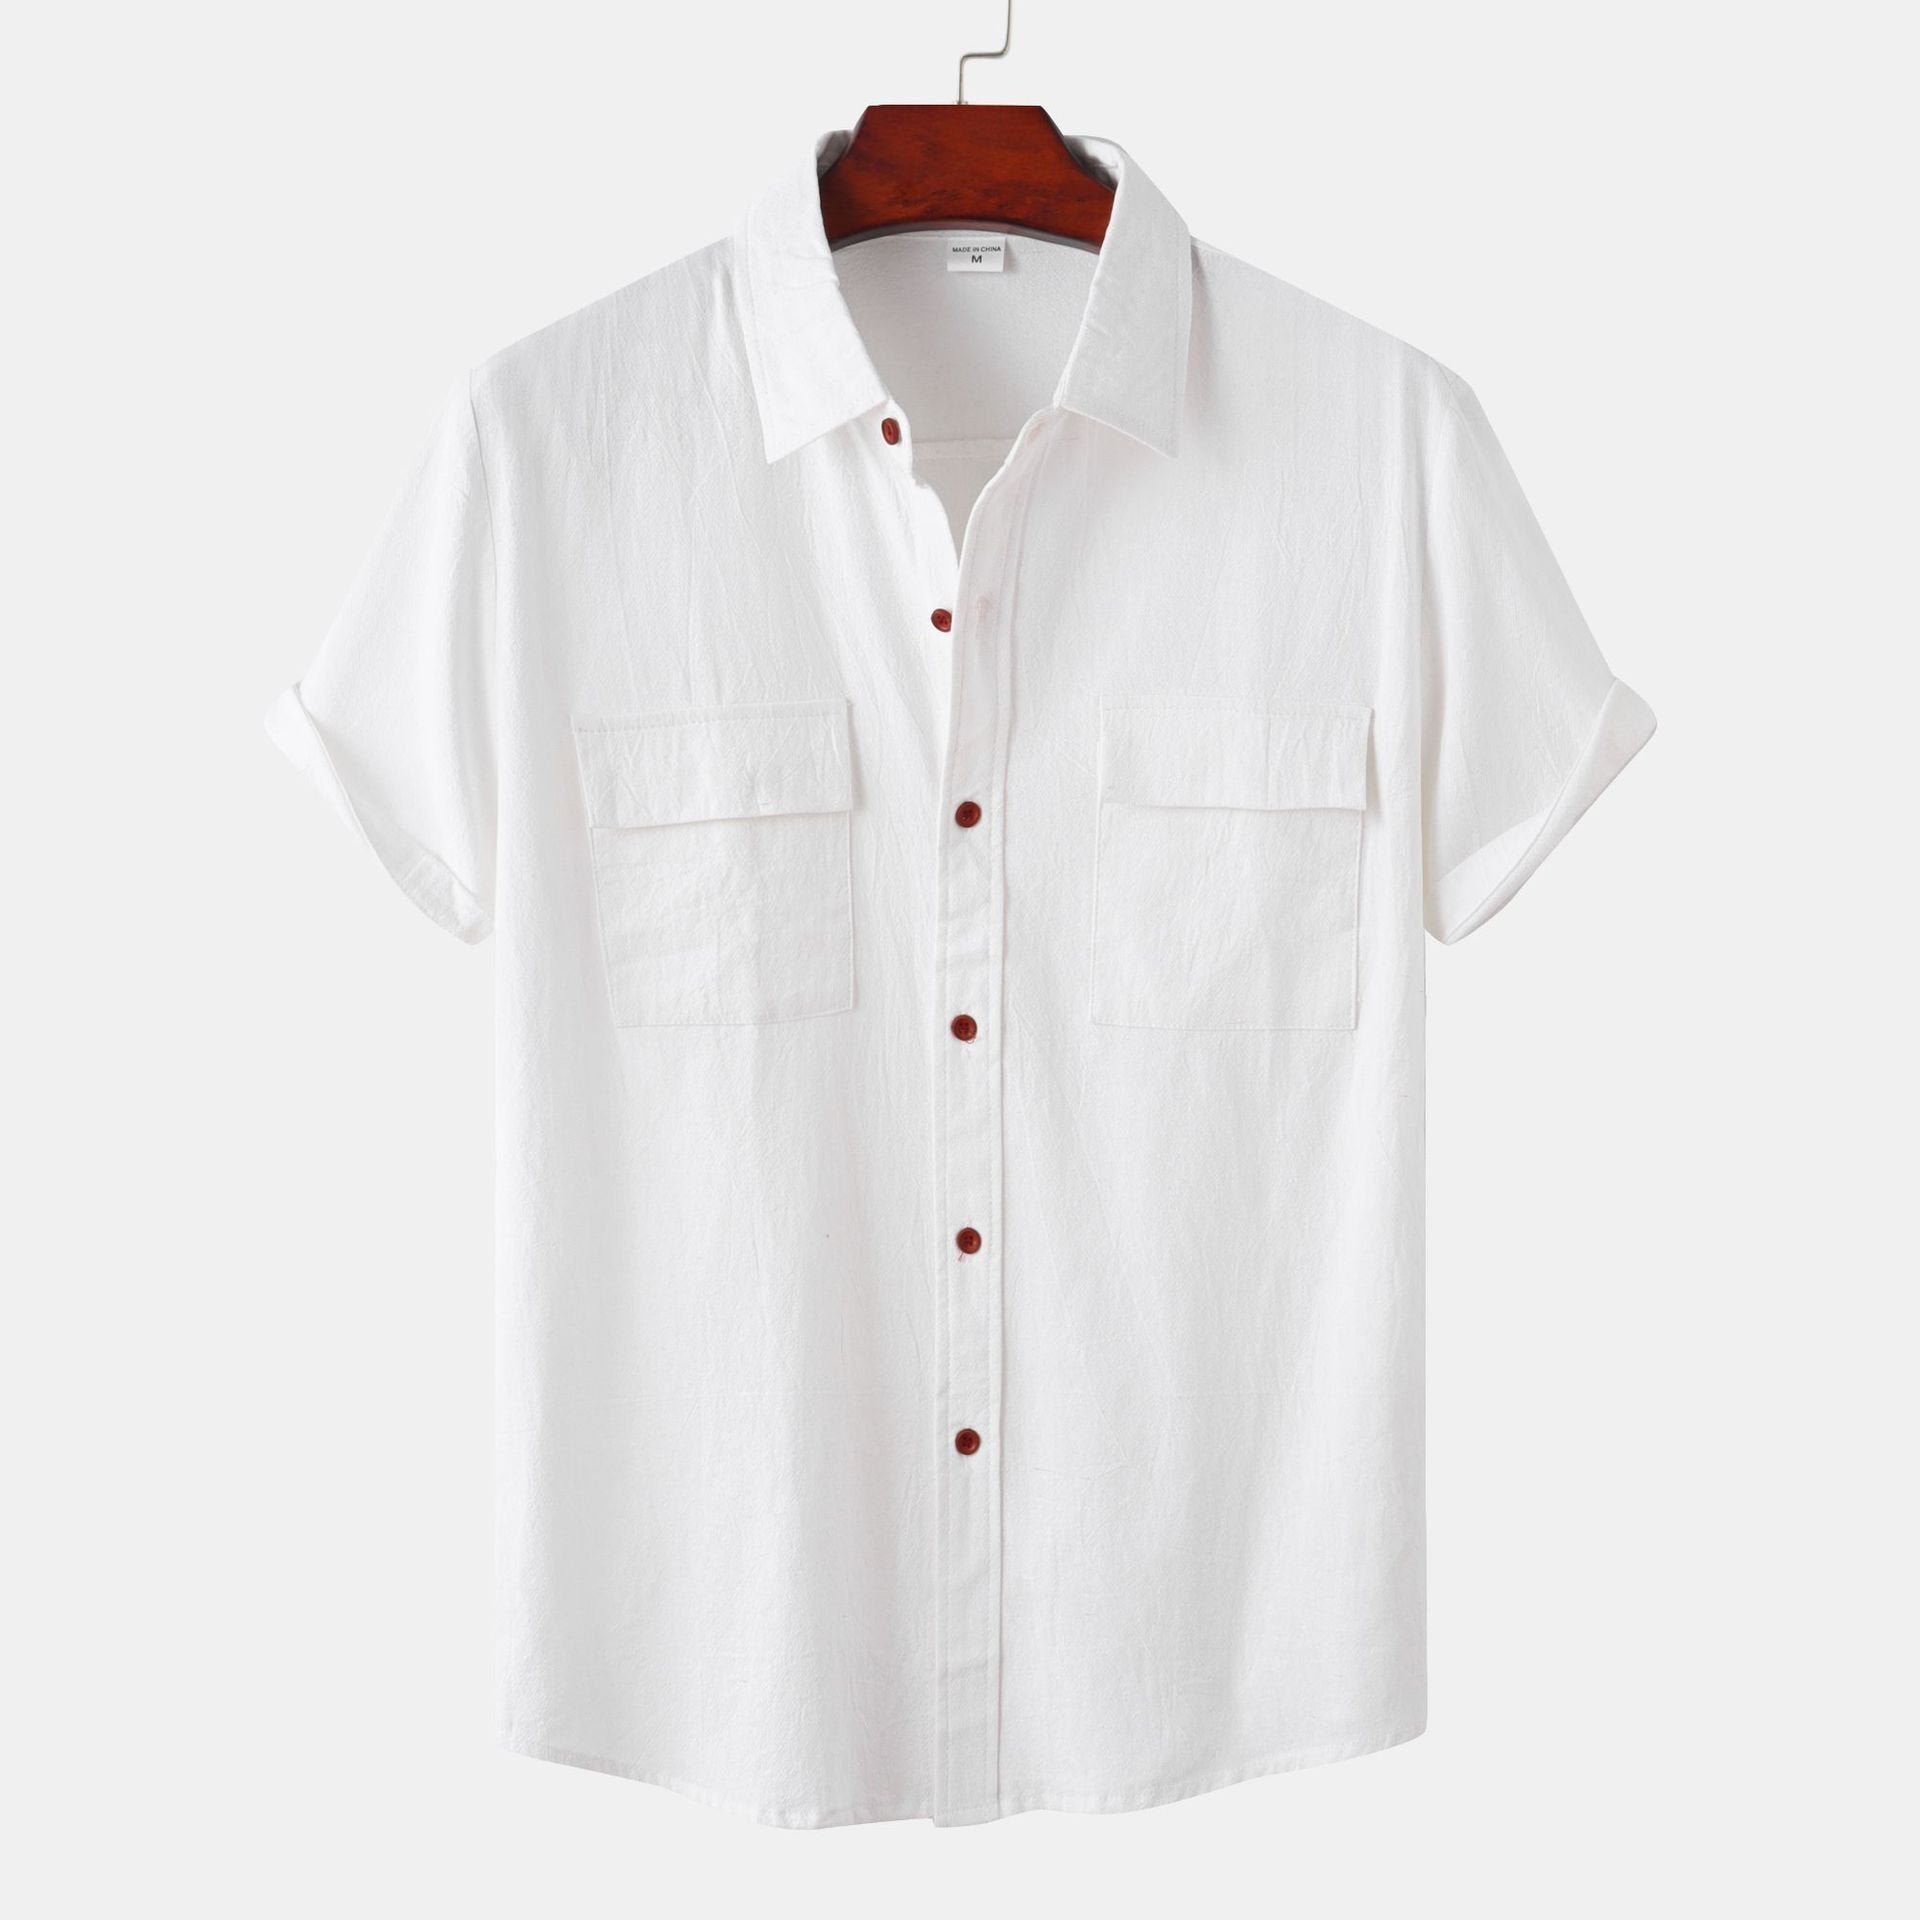 Men's solid colour casual flax short sleeve shirt